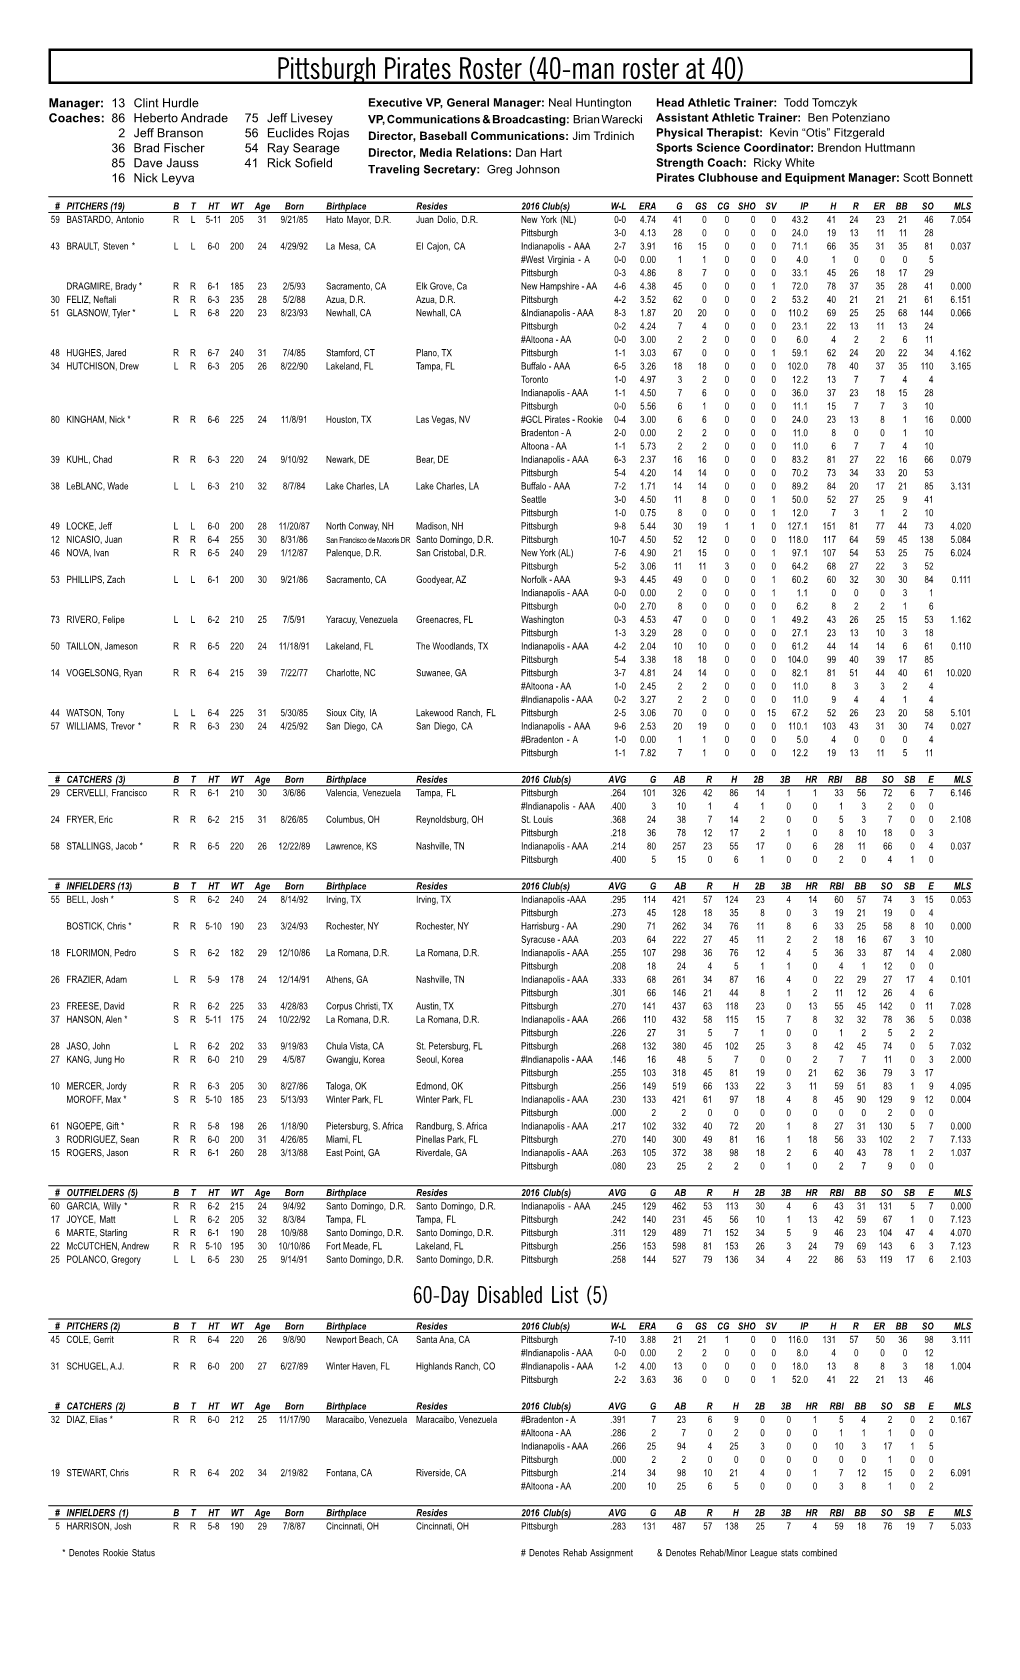 Pittsburgh Pirates Roster (40-Man Roster at 40)